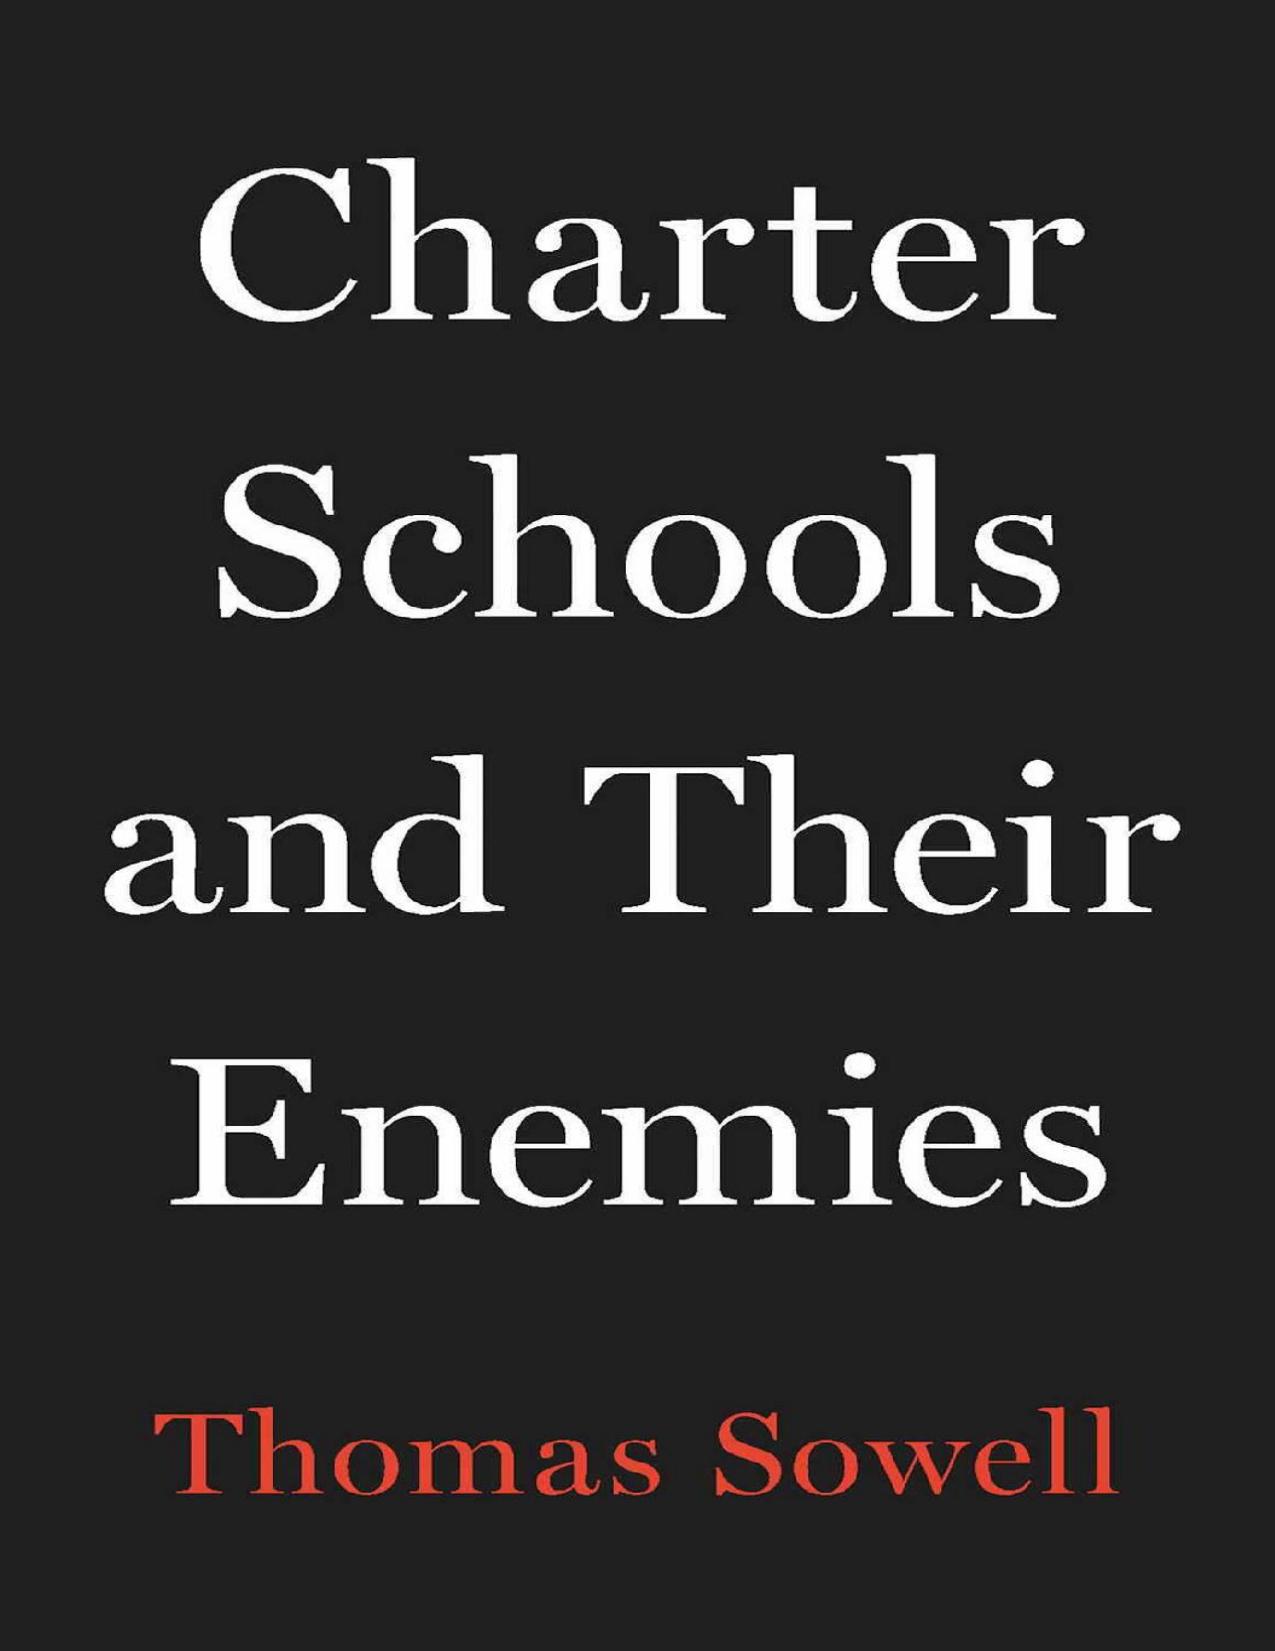 Charter Schools and Their Enemies by Thomas Sowell